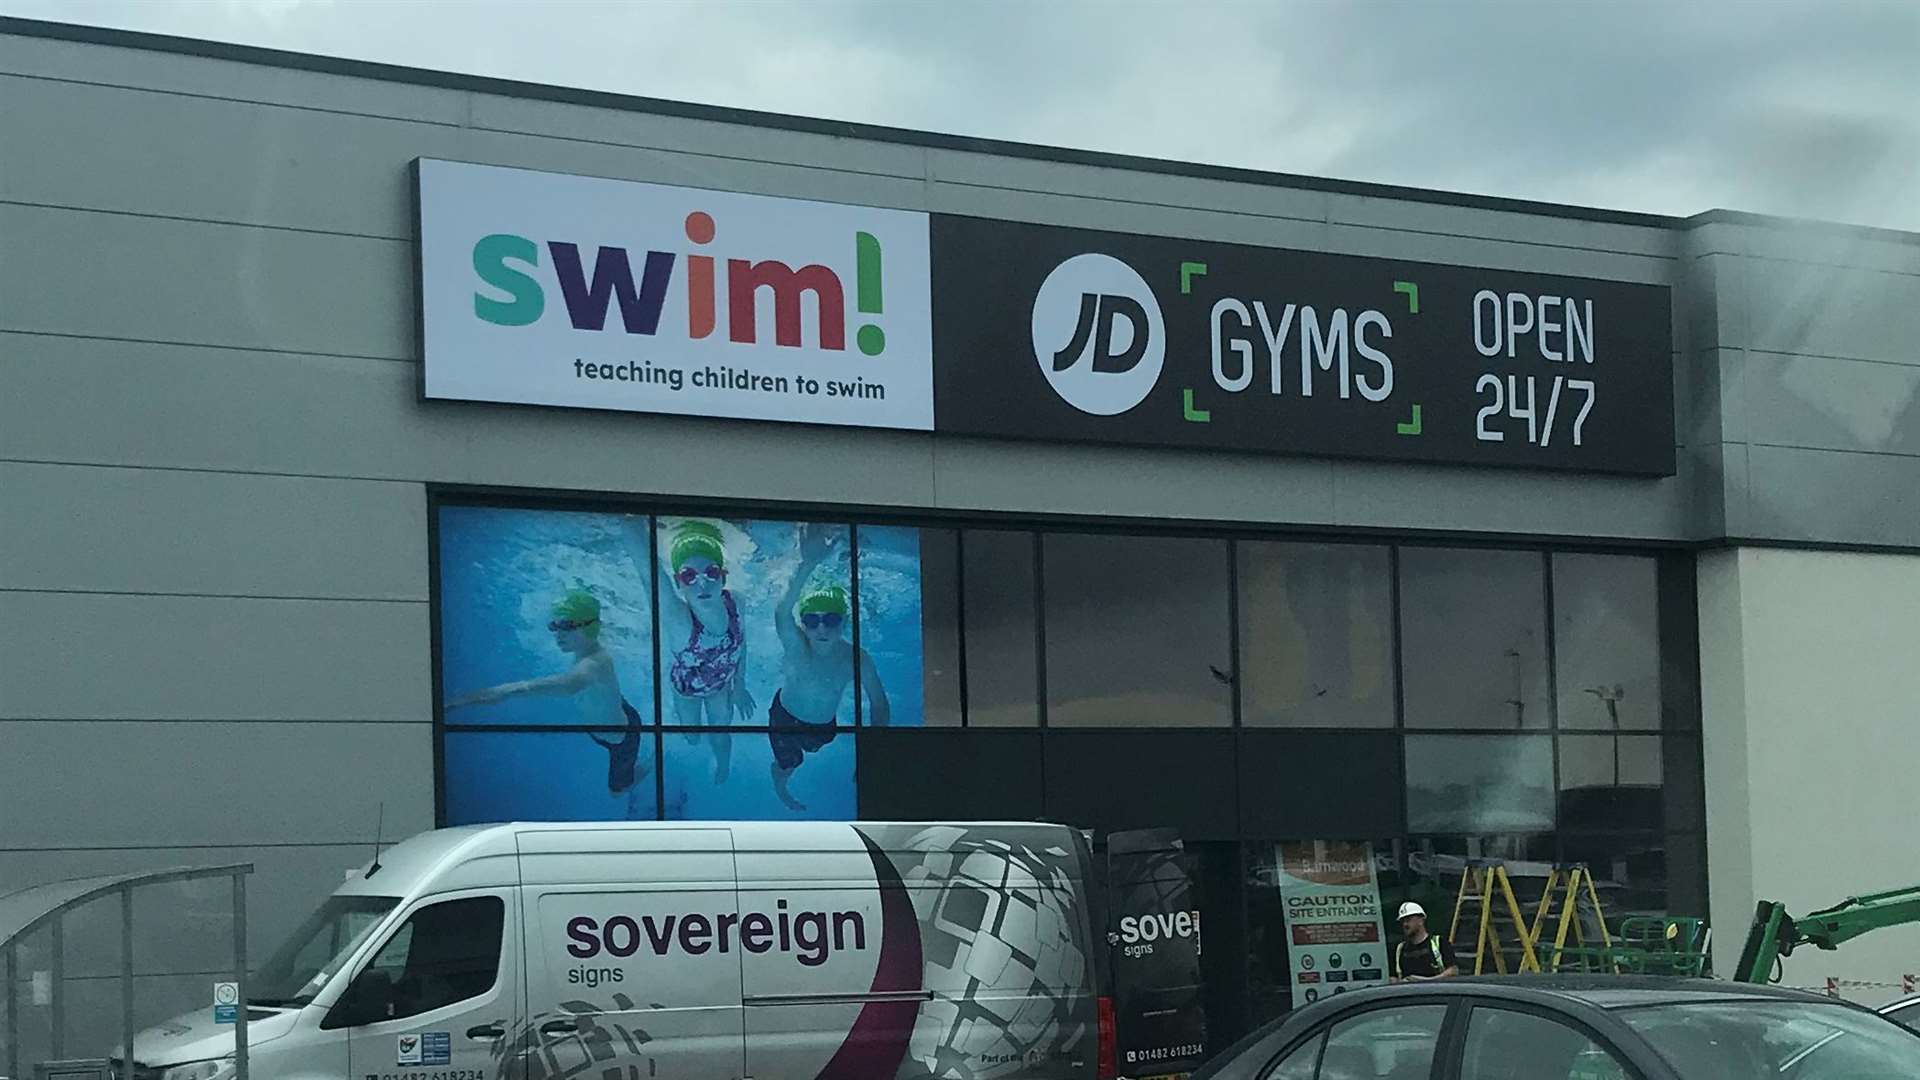 Swim! has confirmed it will be sharing the unit with its partner company JD Gyms